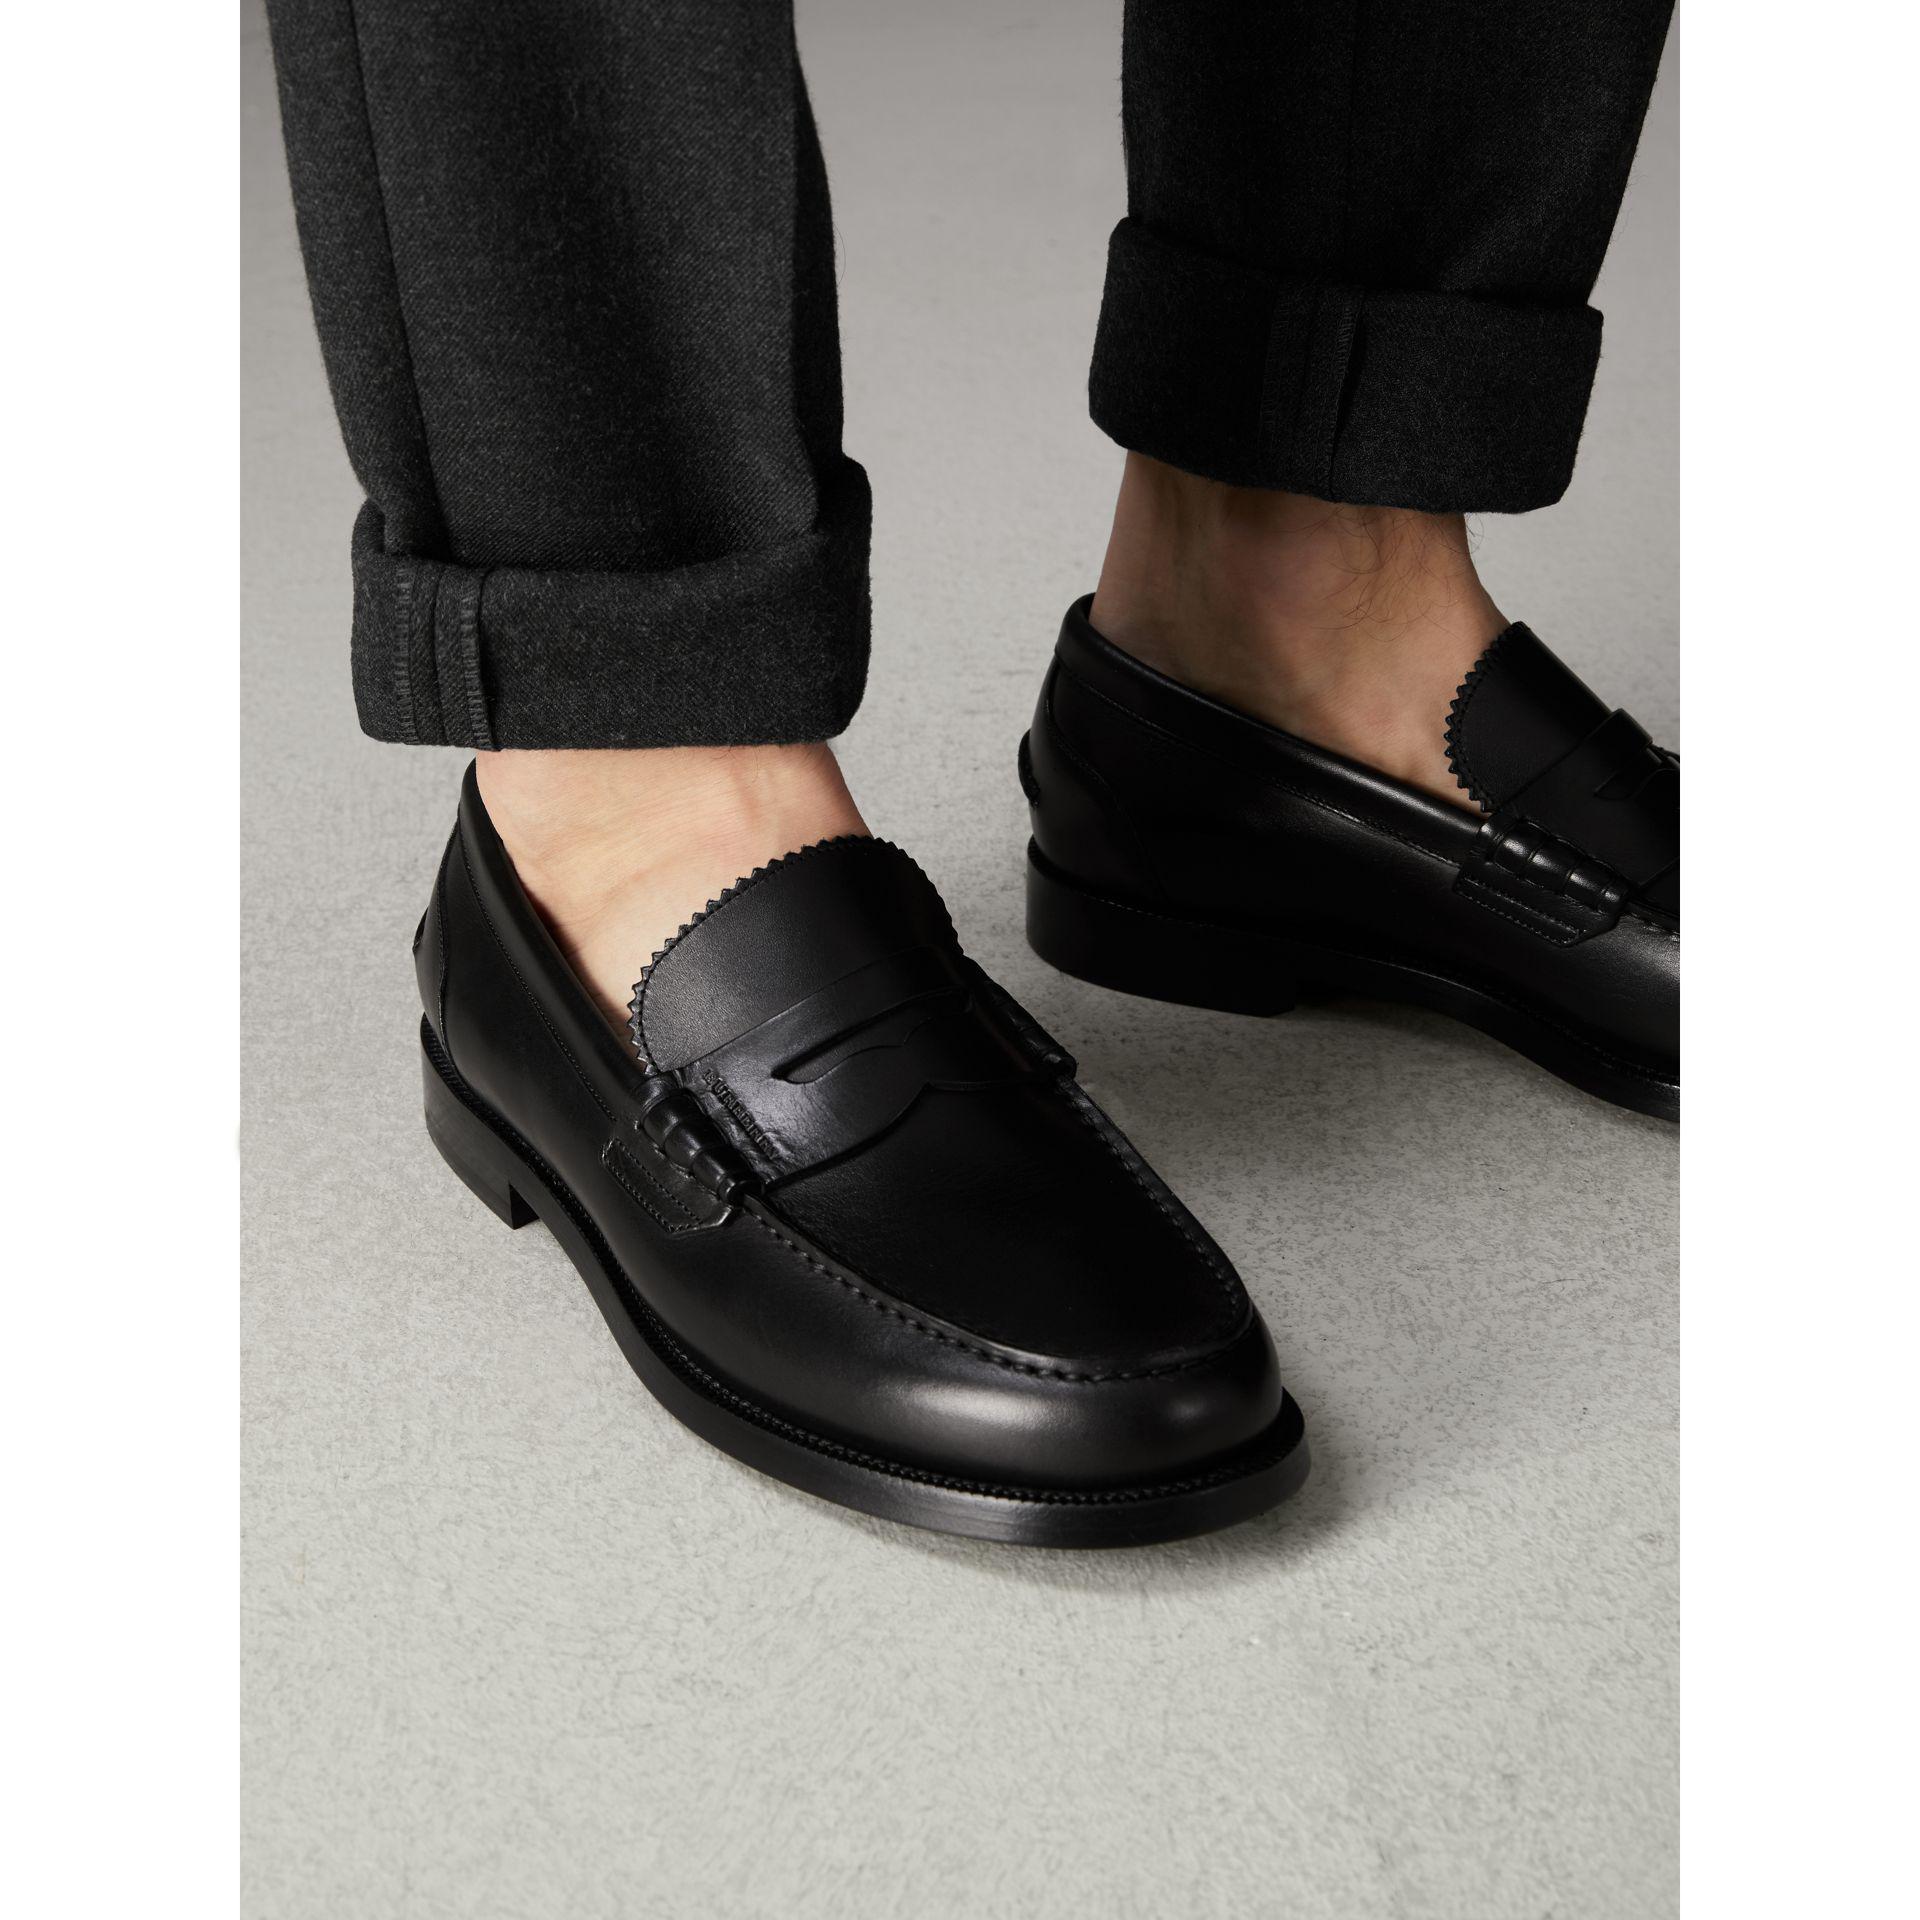 Burberry Leather Penny Loafers in Black for Men - Lyst